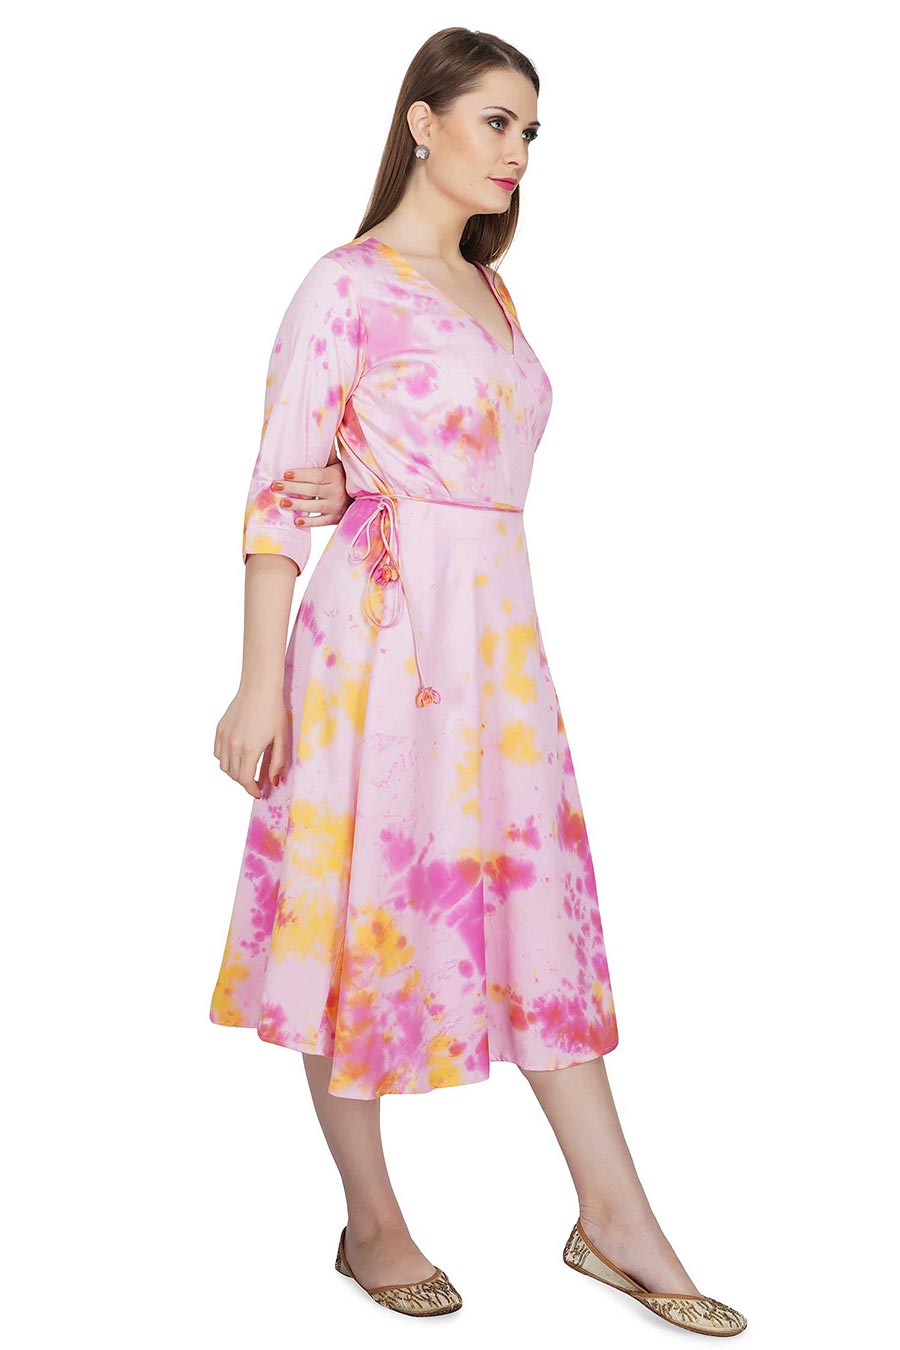 Marble Dyed Pink Wrap Dress